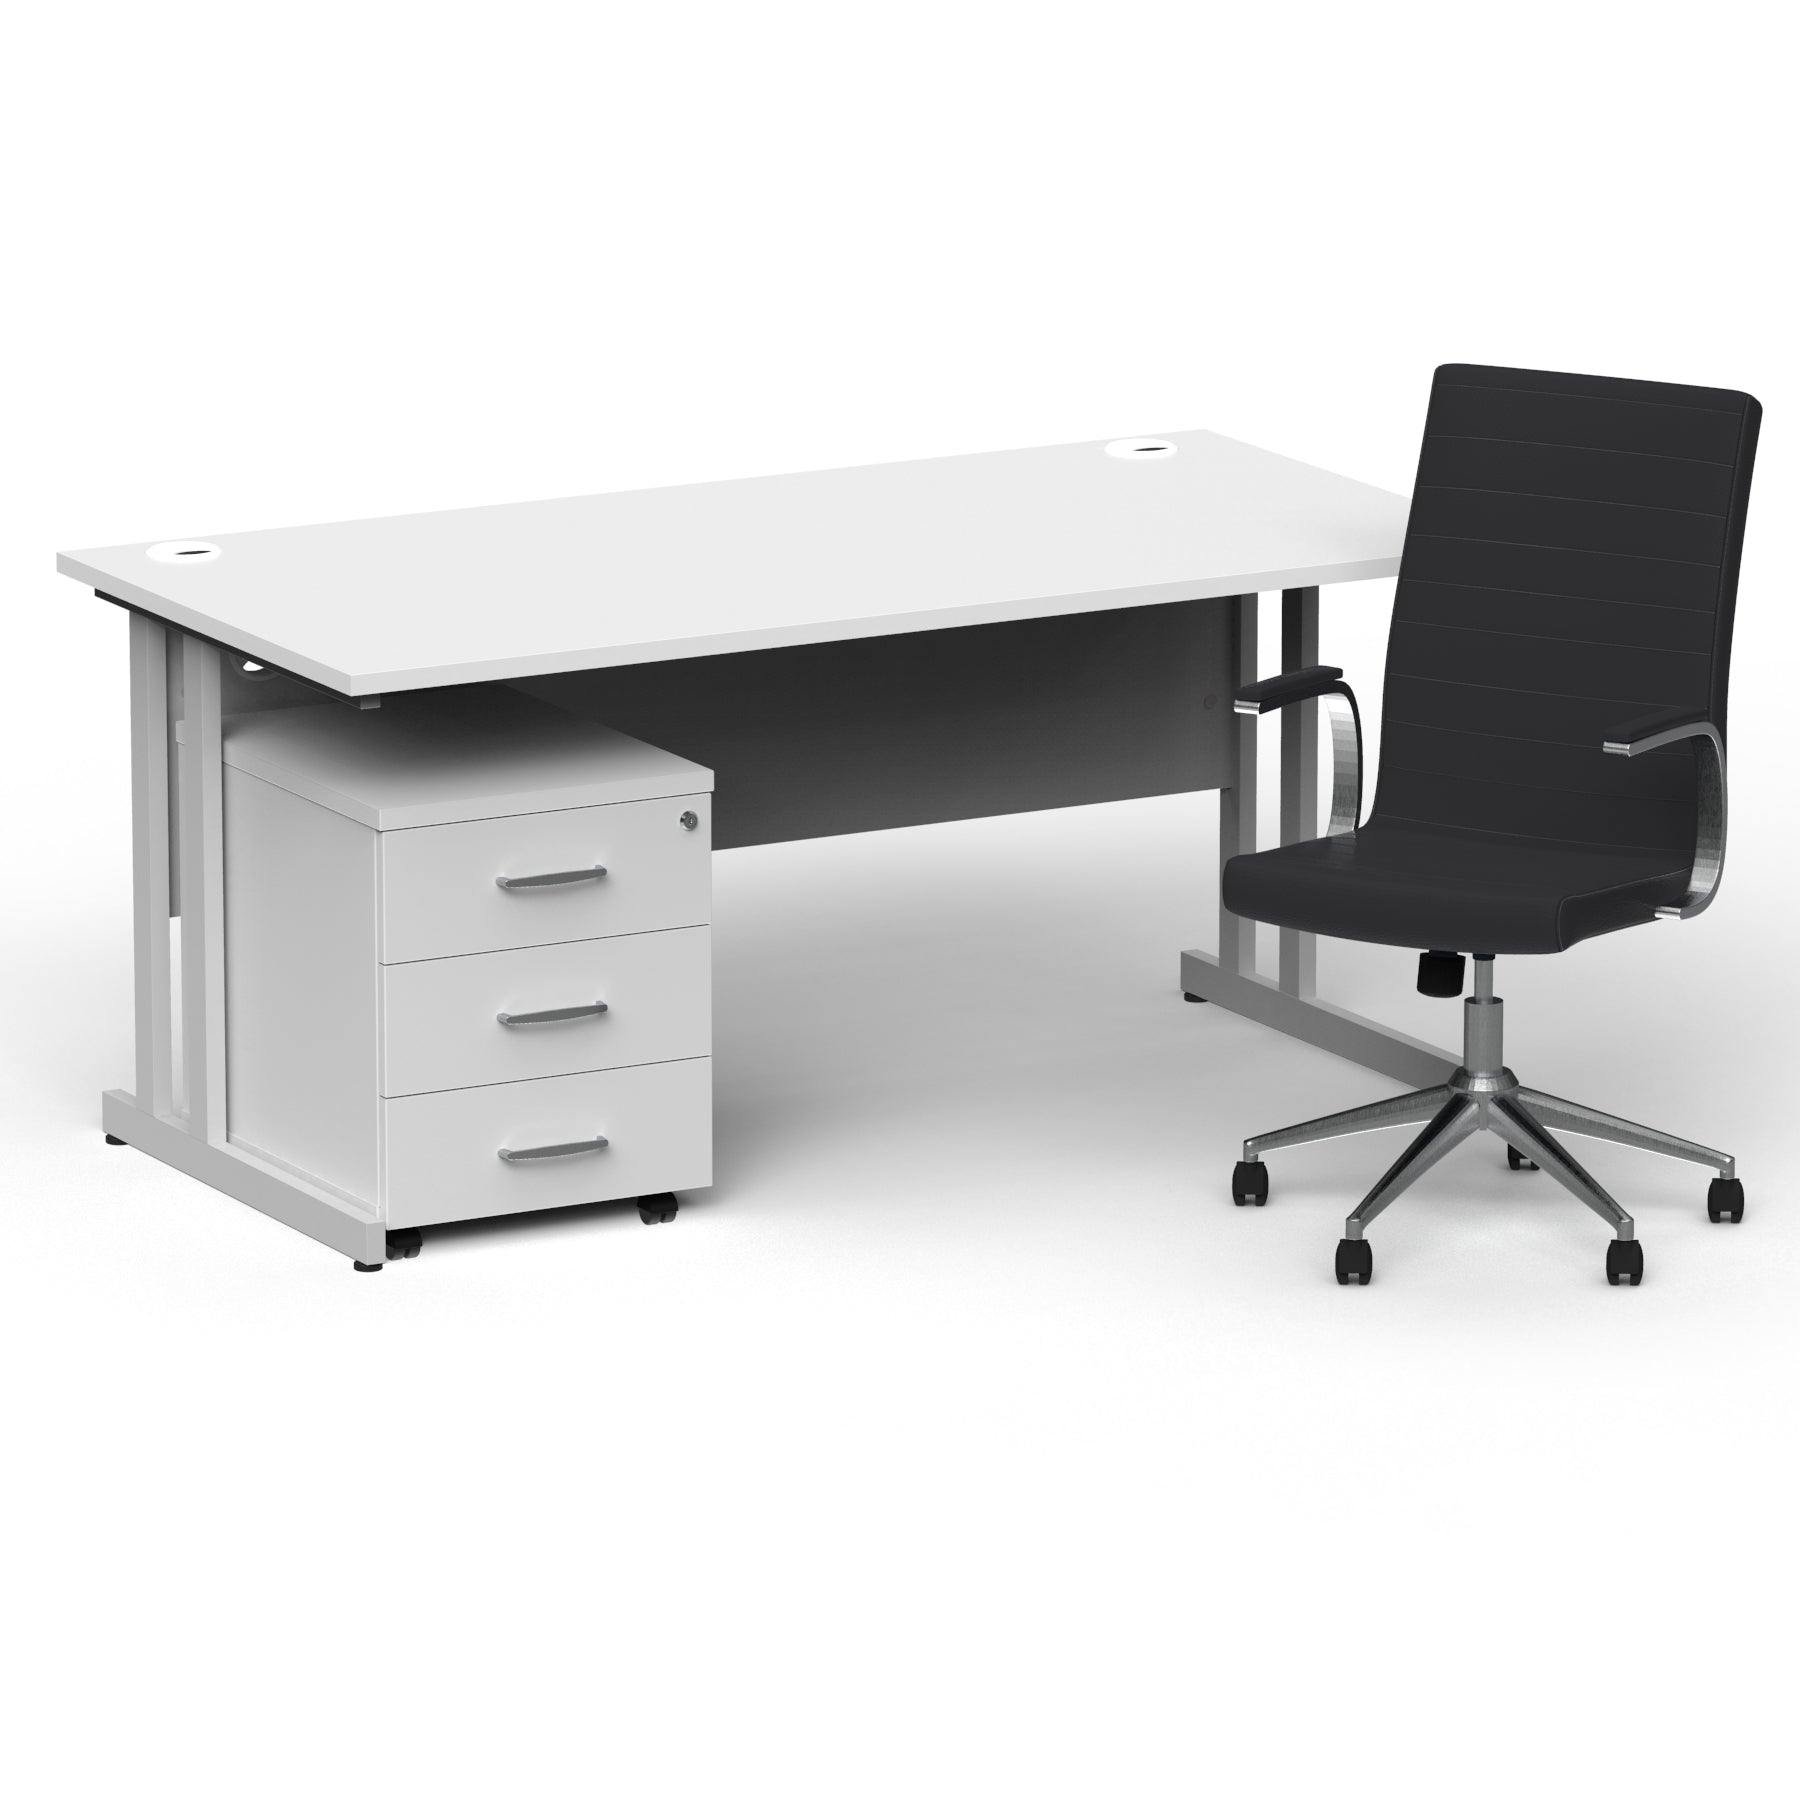 Impulse 1600mm Cantilever Straight Desk & Mobile Pedestal with Ezra Black Executive Chair - 5-Year Furniture Guarantee, 2-Year Seating Guarantee